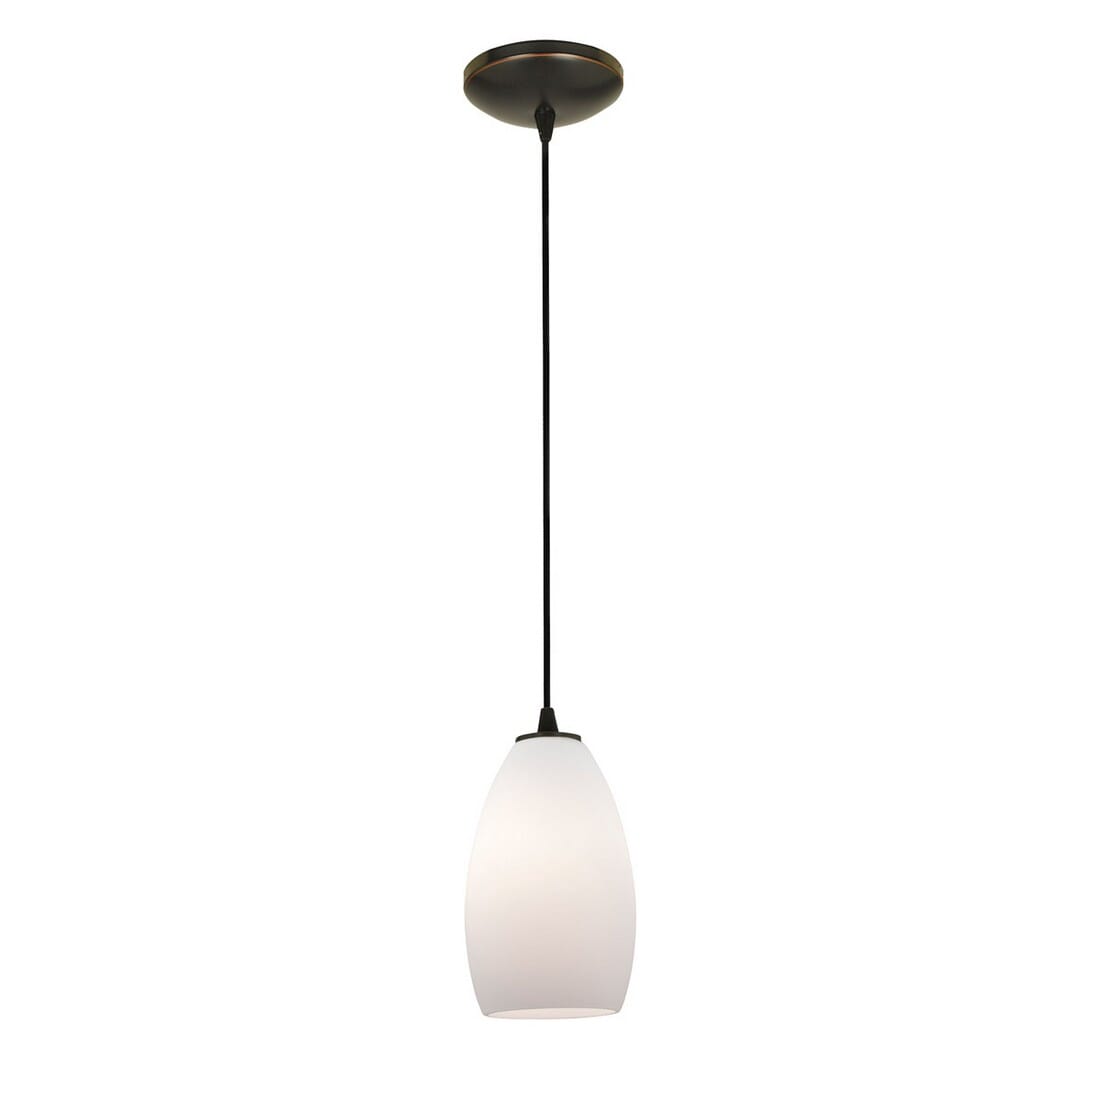 Access Champagne Pendant Light in Oil Rubbed Bronze -  Access Lighting, 28012-3C-ORB/OPL